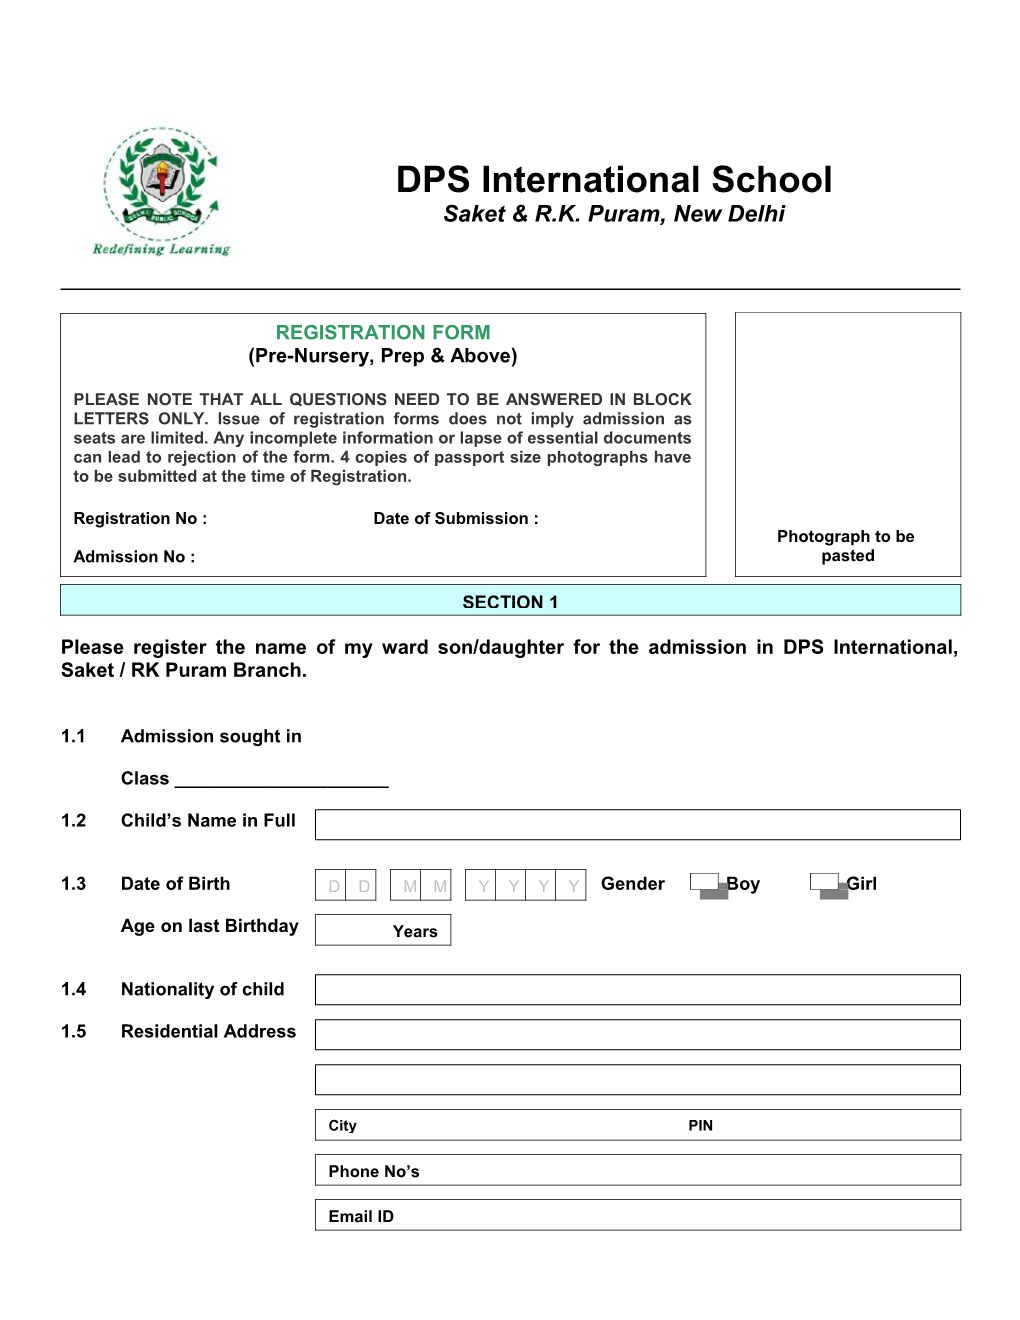 Please Register the Name of My Ward Son/Daughter for the Admission in DPS International